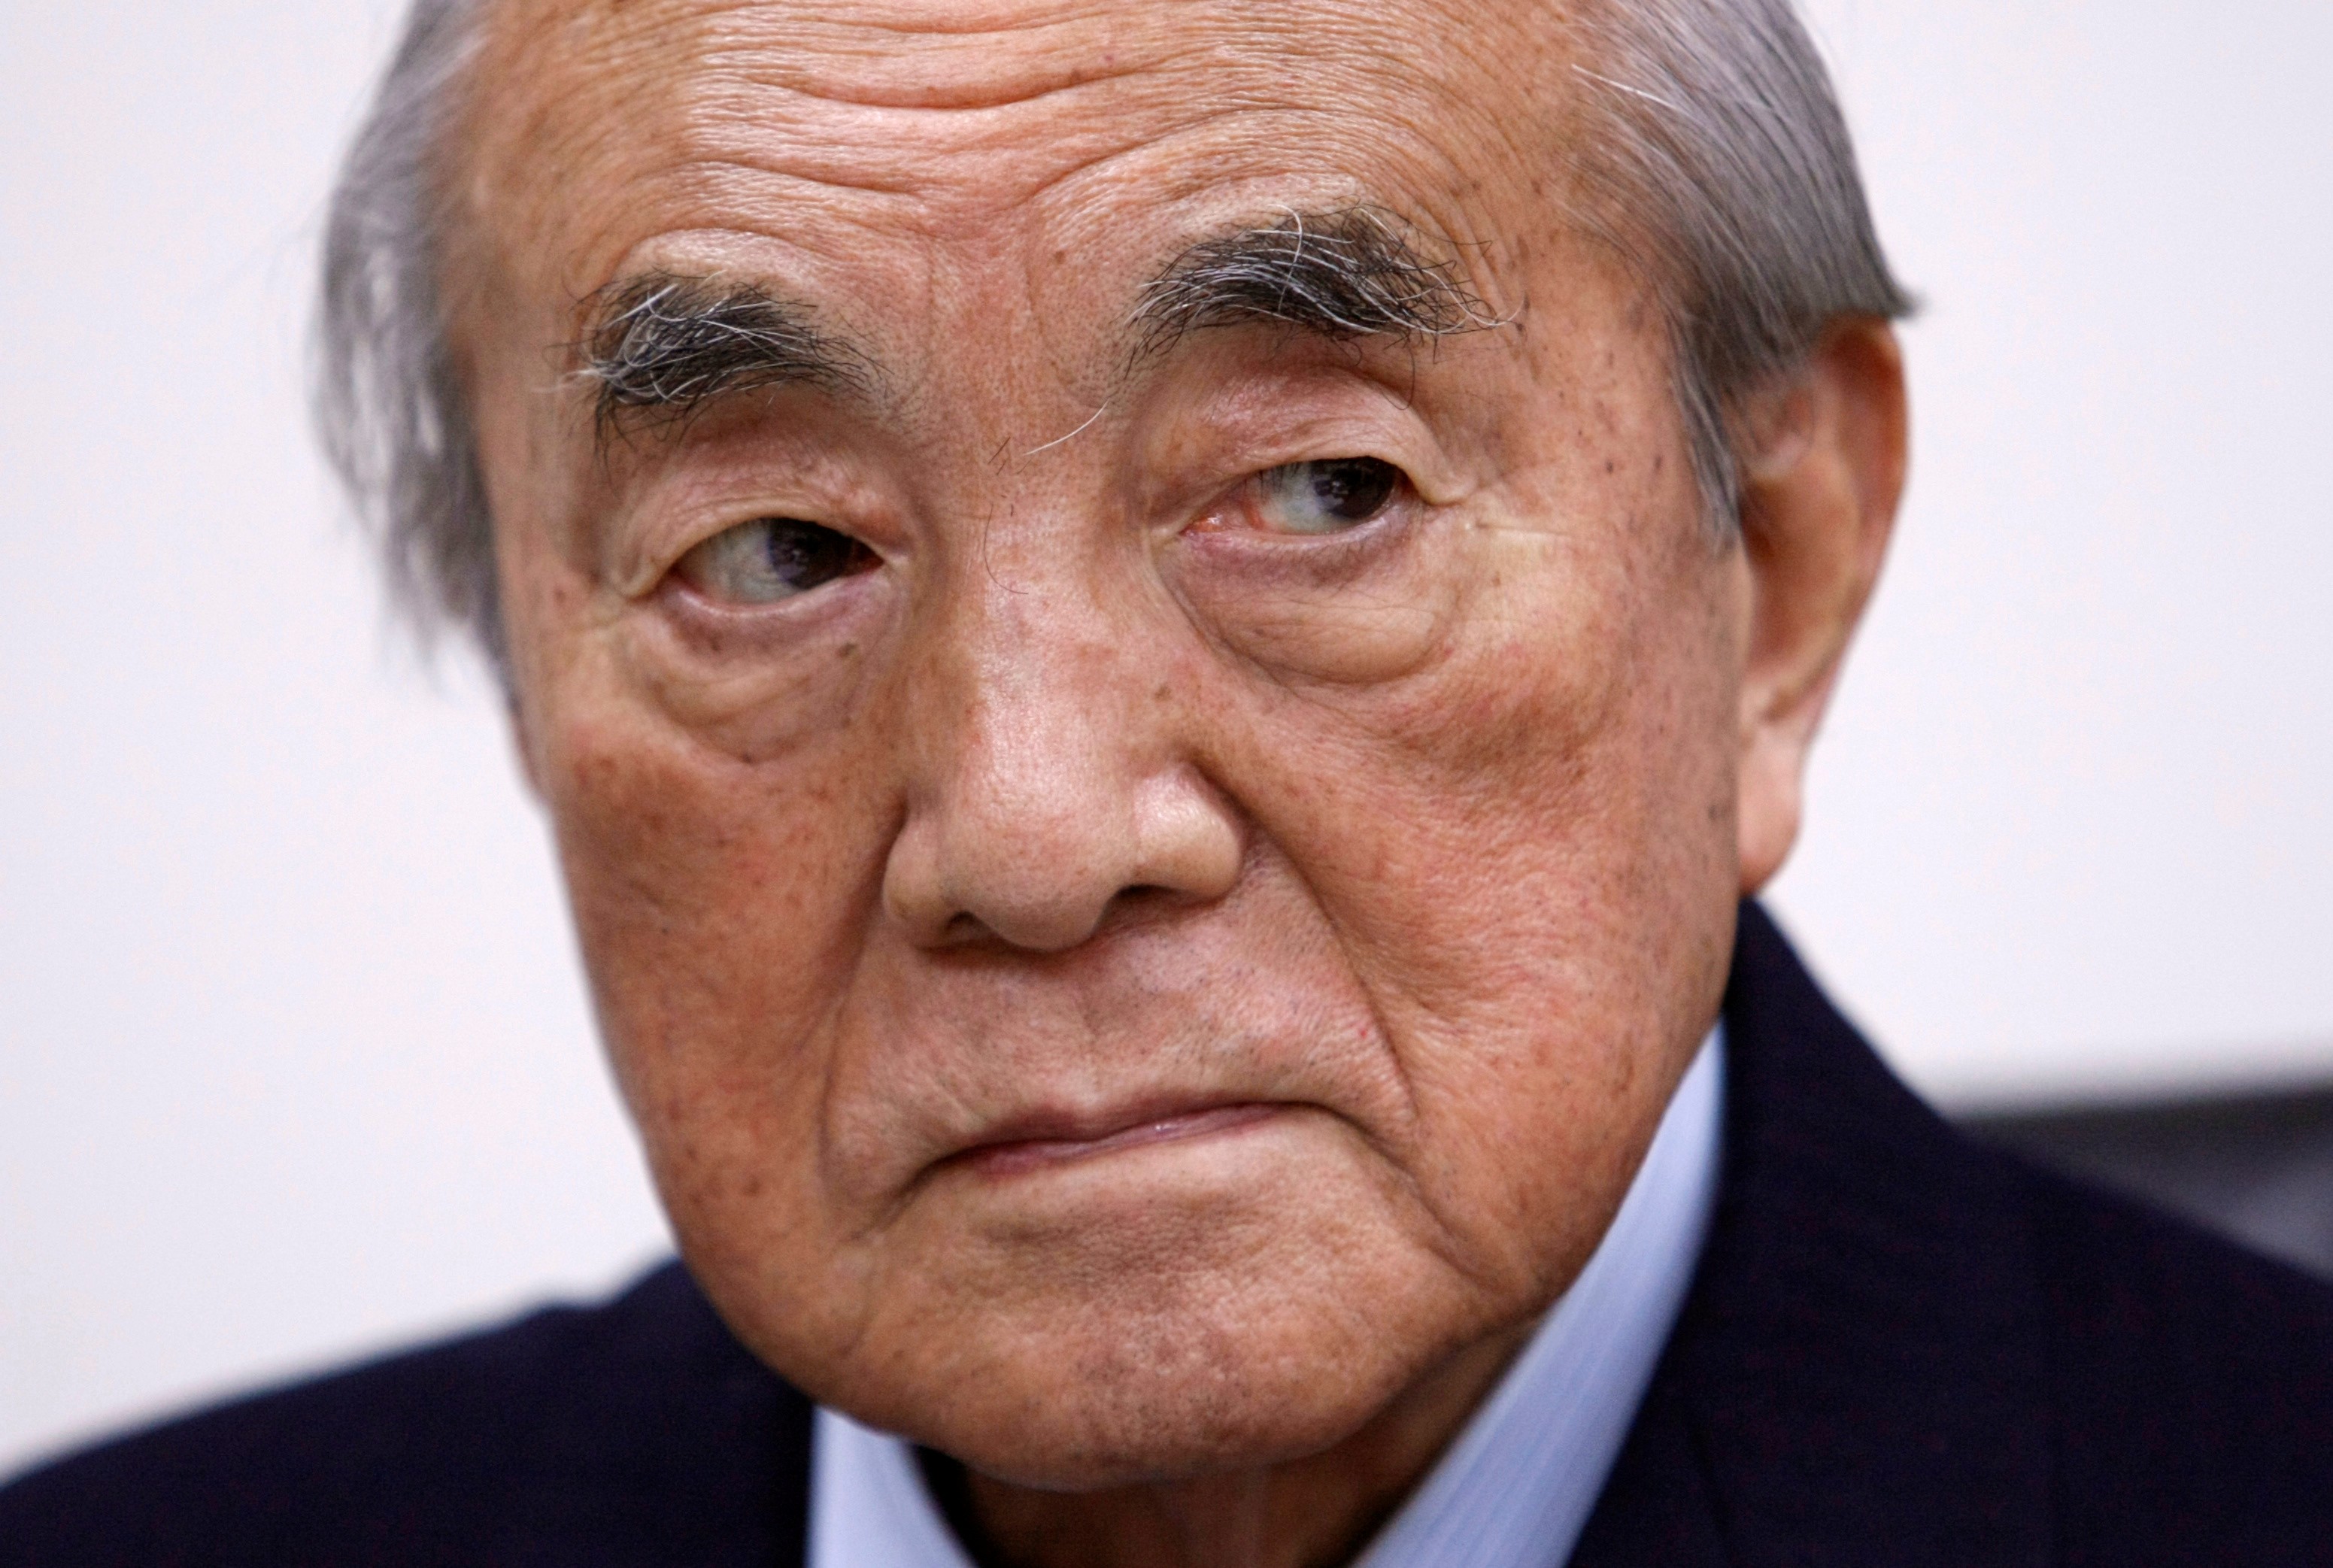 Former Japanese prime minister Yasuhiro Nakasone, who has died aged 101, is seen here in an interview in 2010. Photo: Reuters